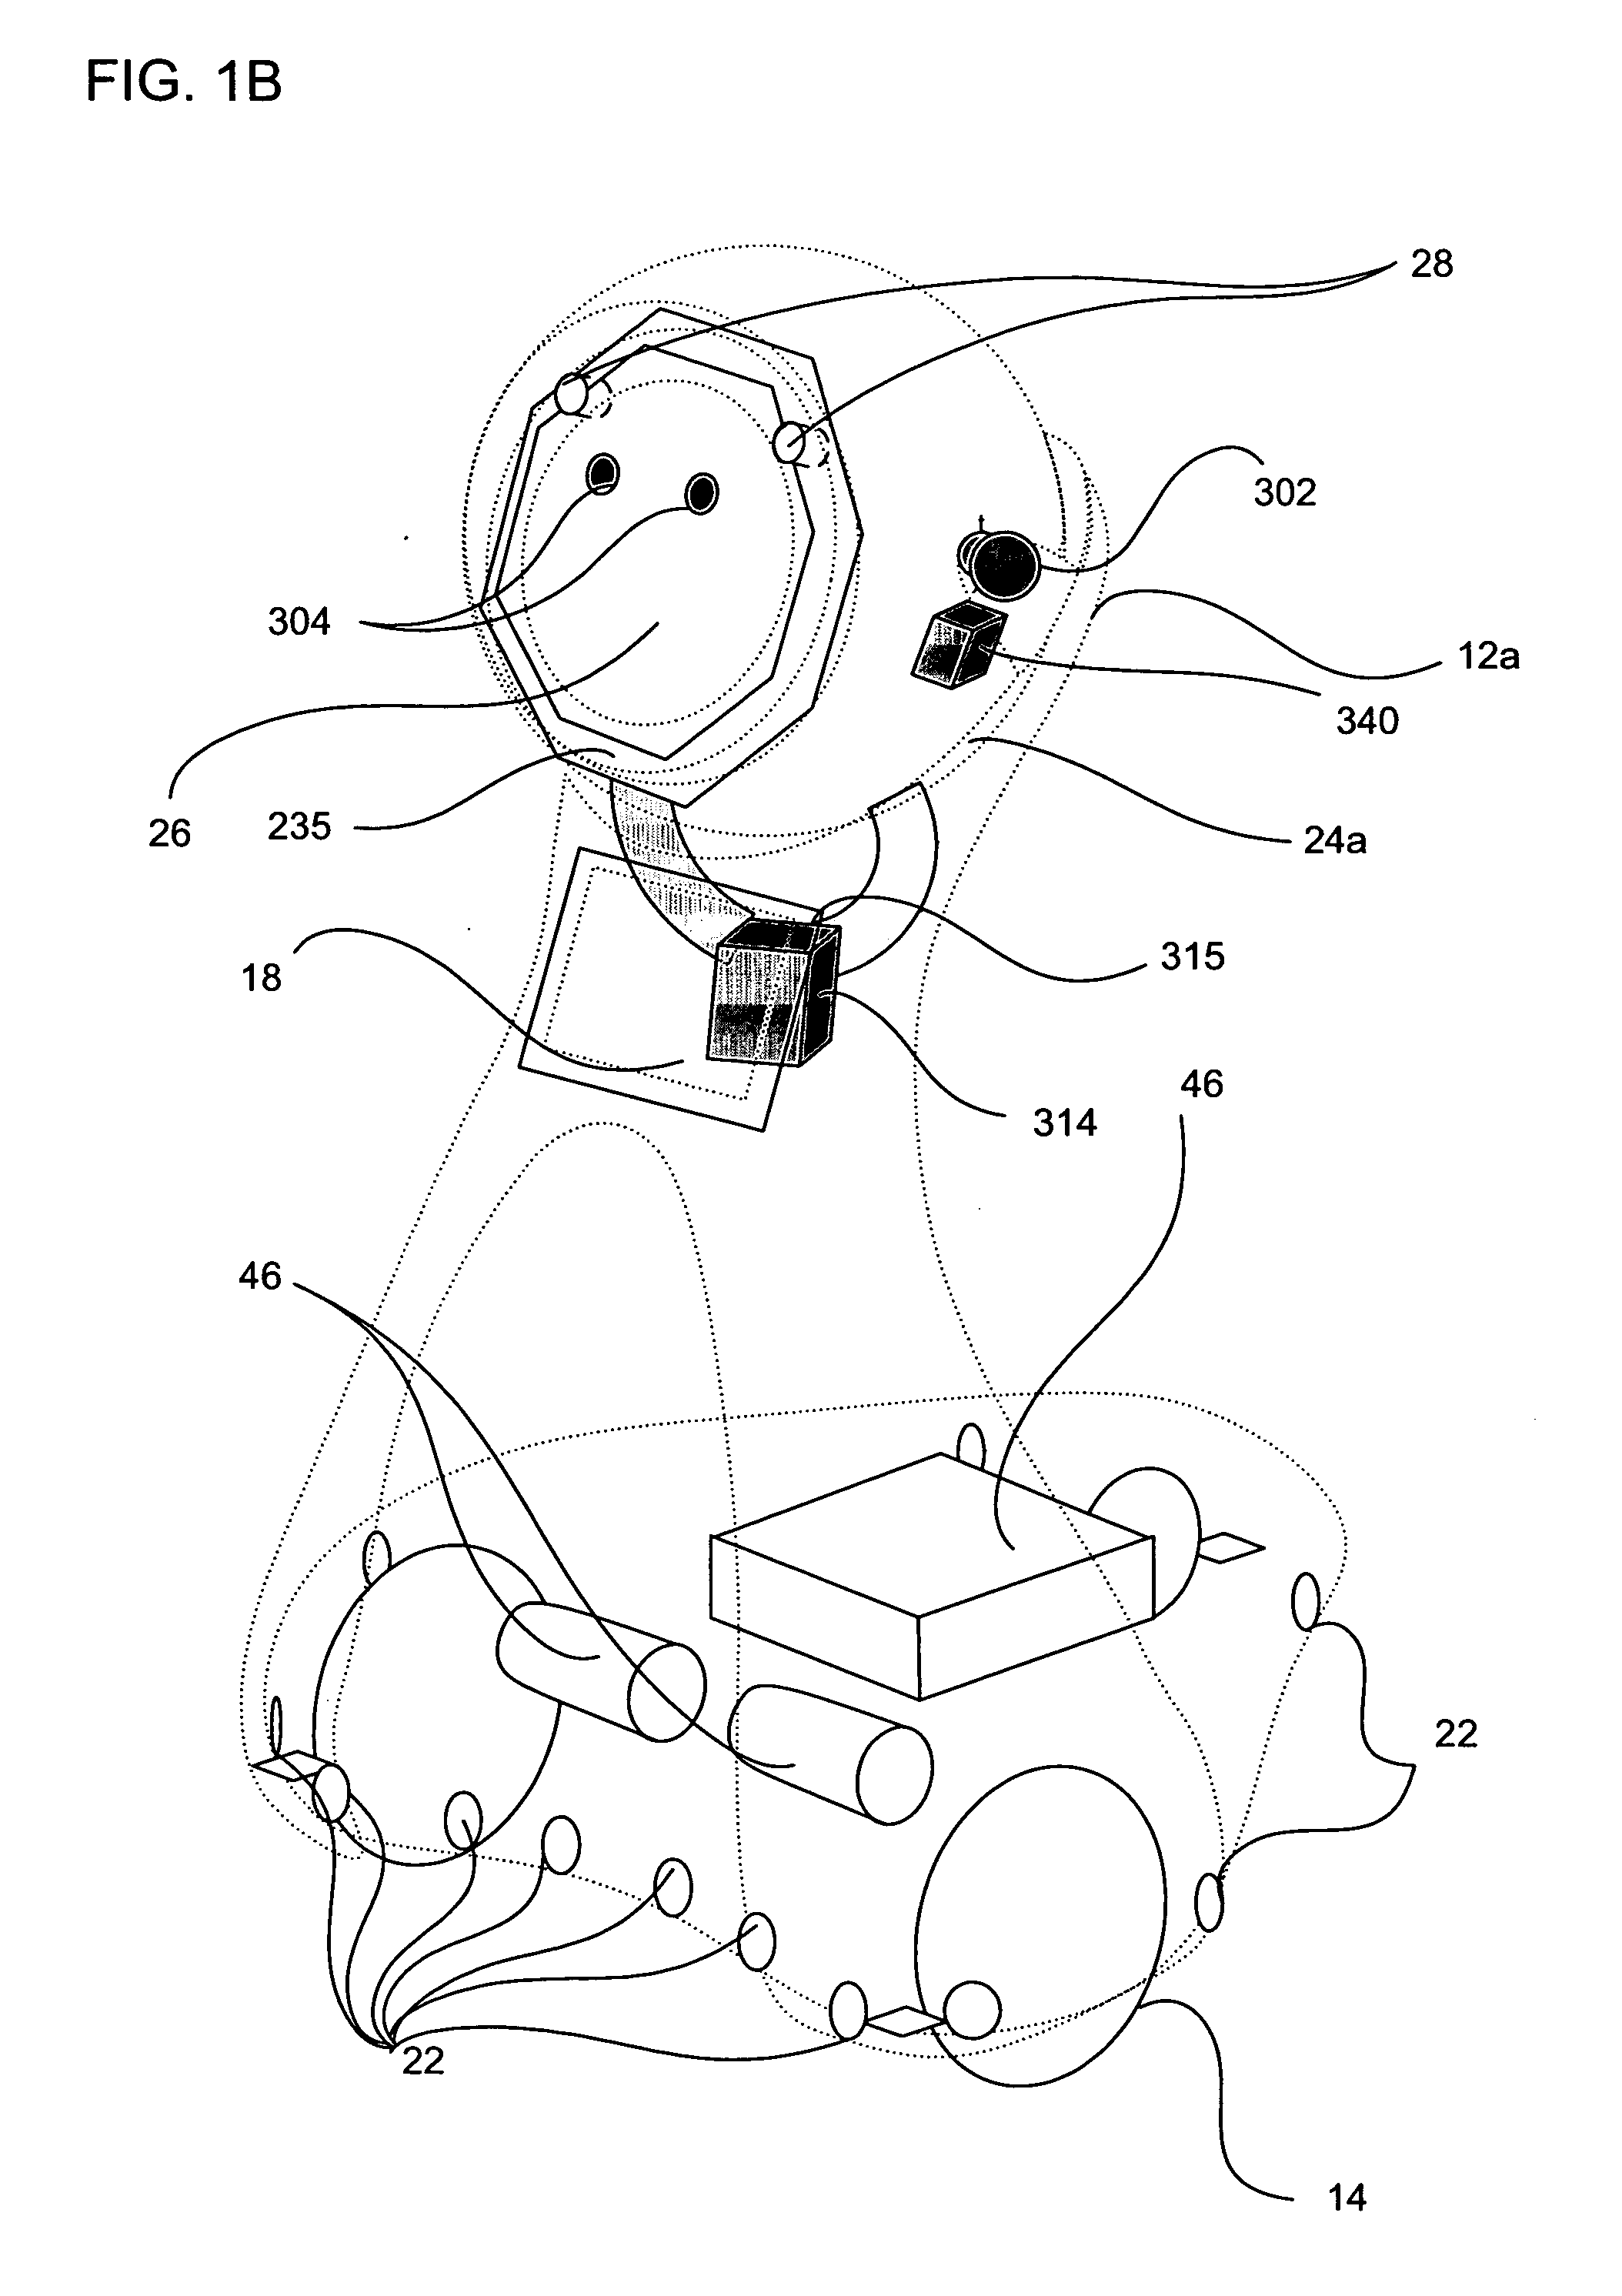 Companion robot for personal interaction